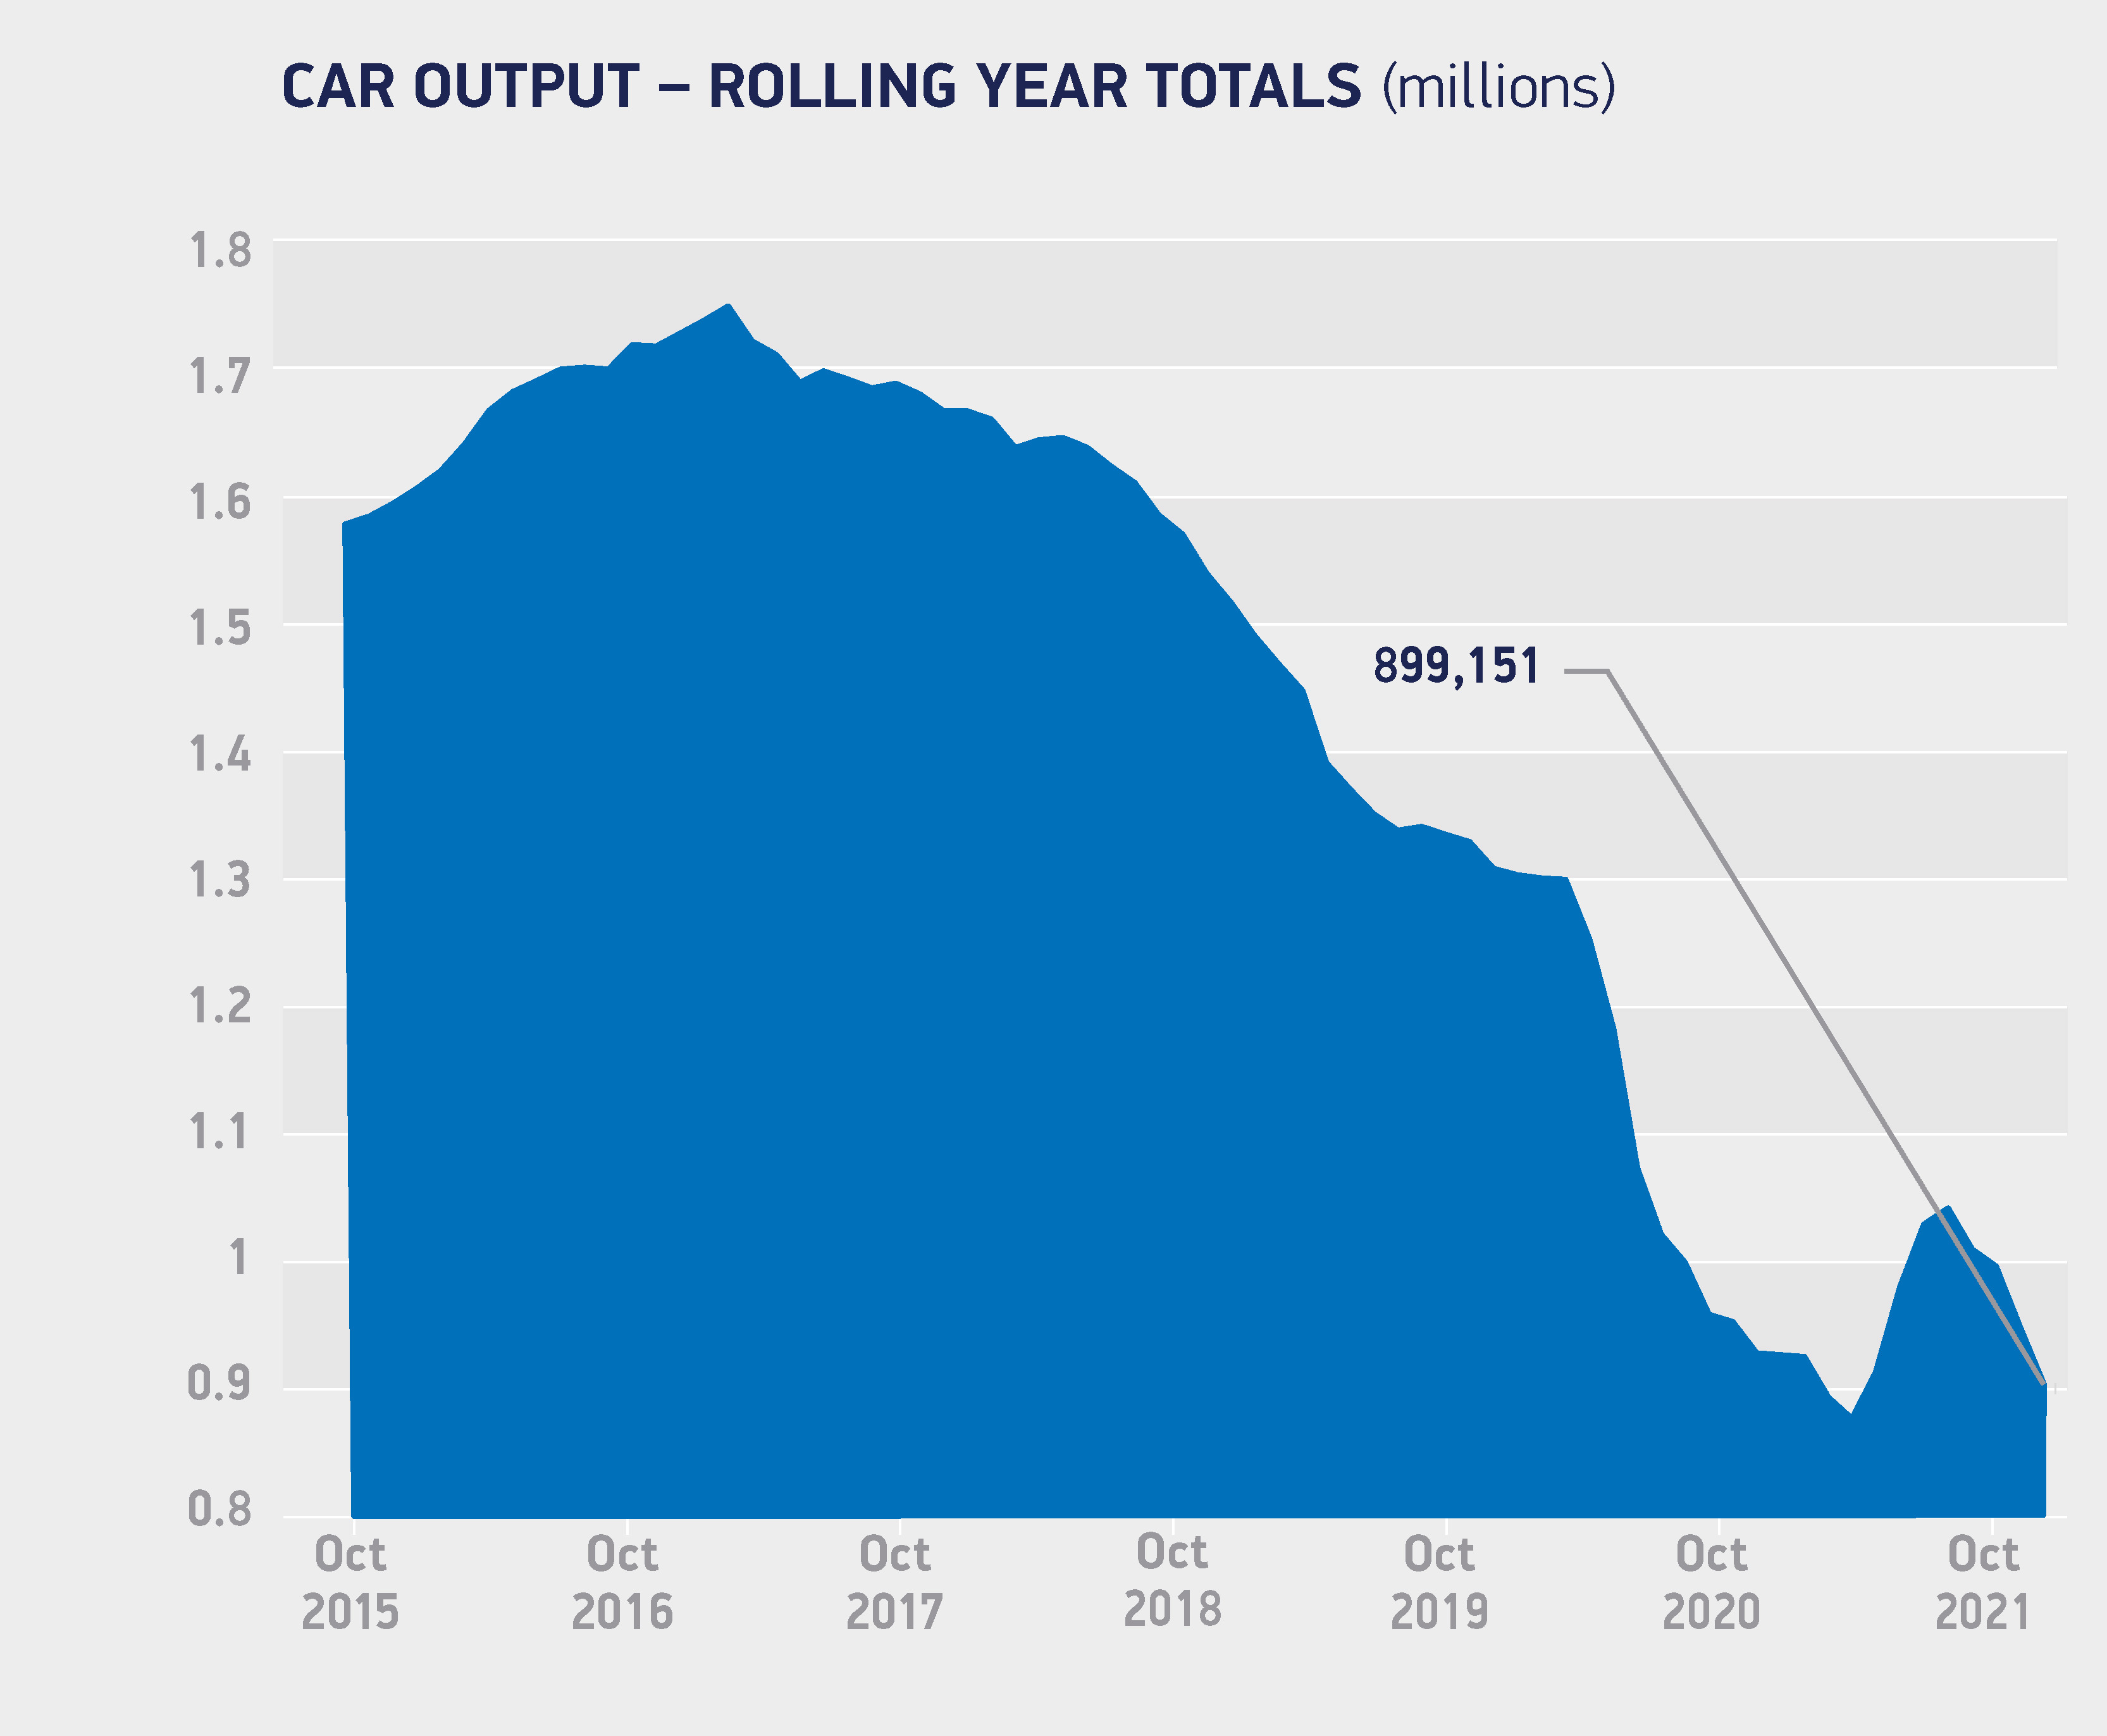 Car output in October.